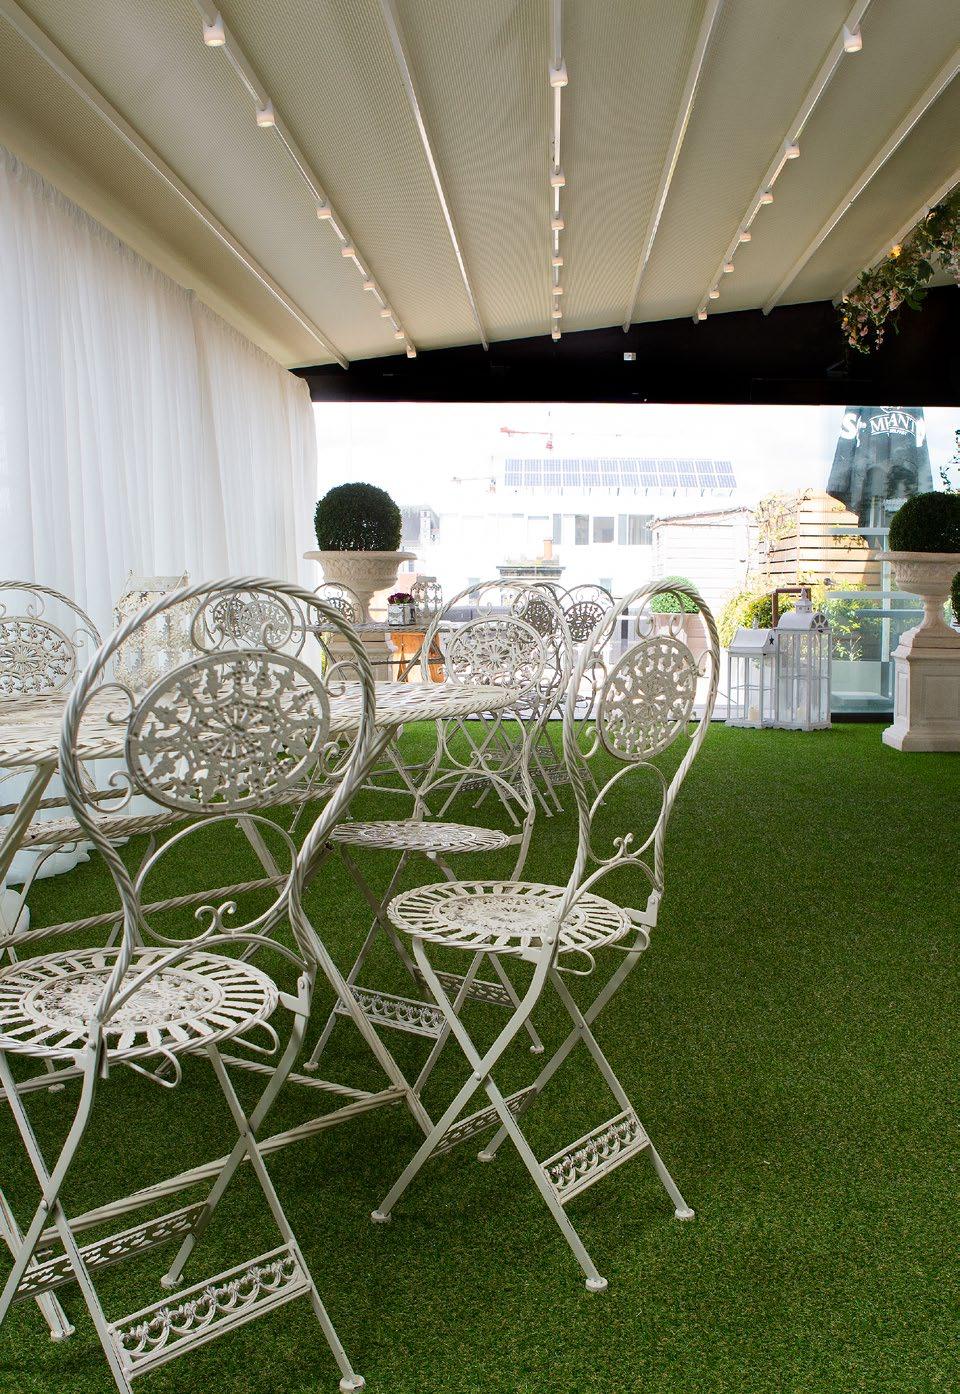 The Absolut Roof Garden This recently renovated, unique events space is now available to book for private events.